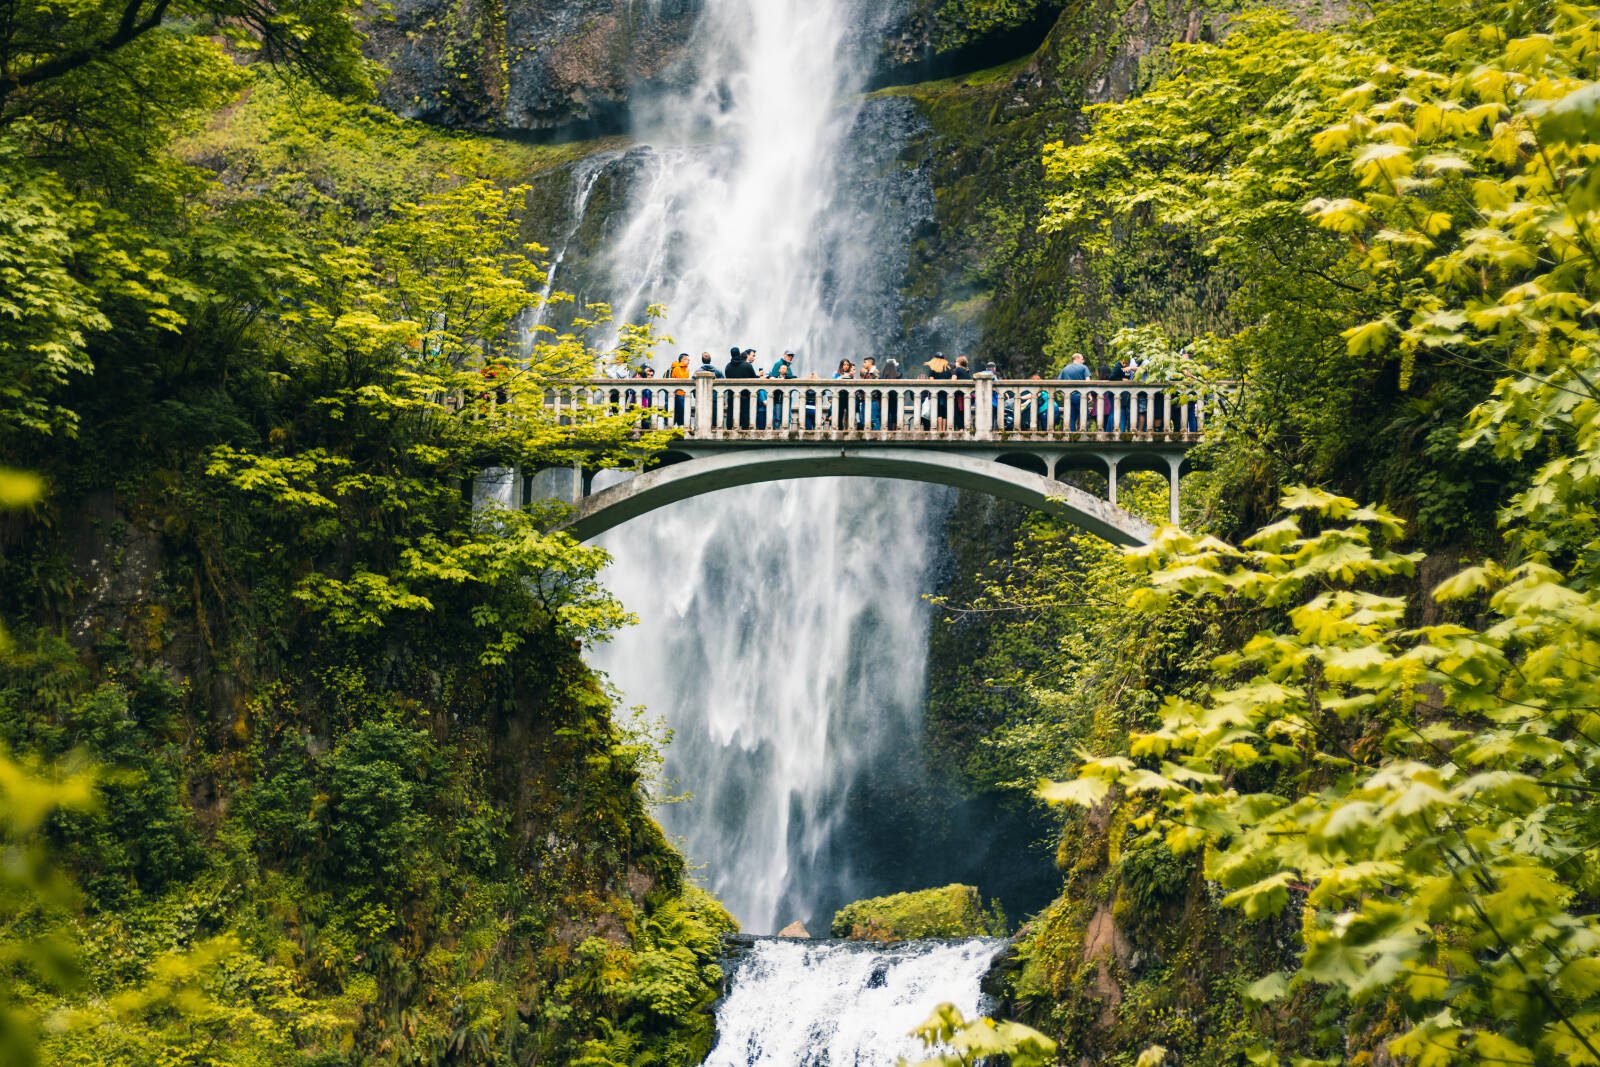 Oregon’s Multnomah Falls, the most-visited natural recreation site in the Pacific Northwest.